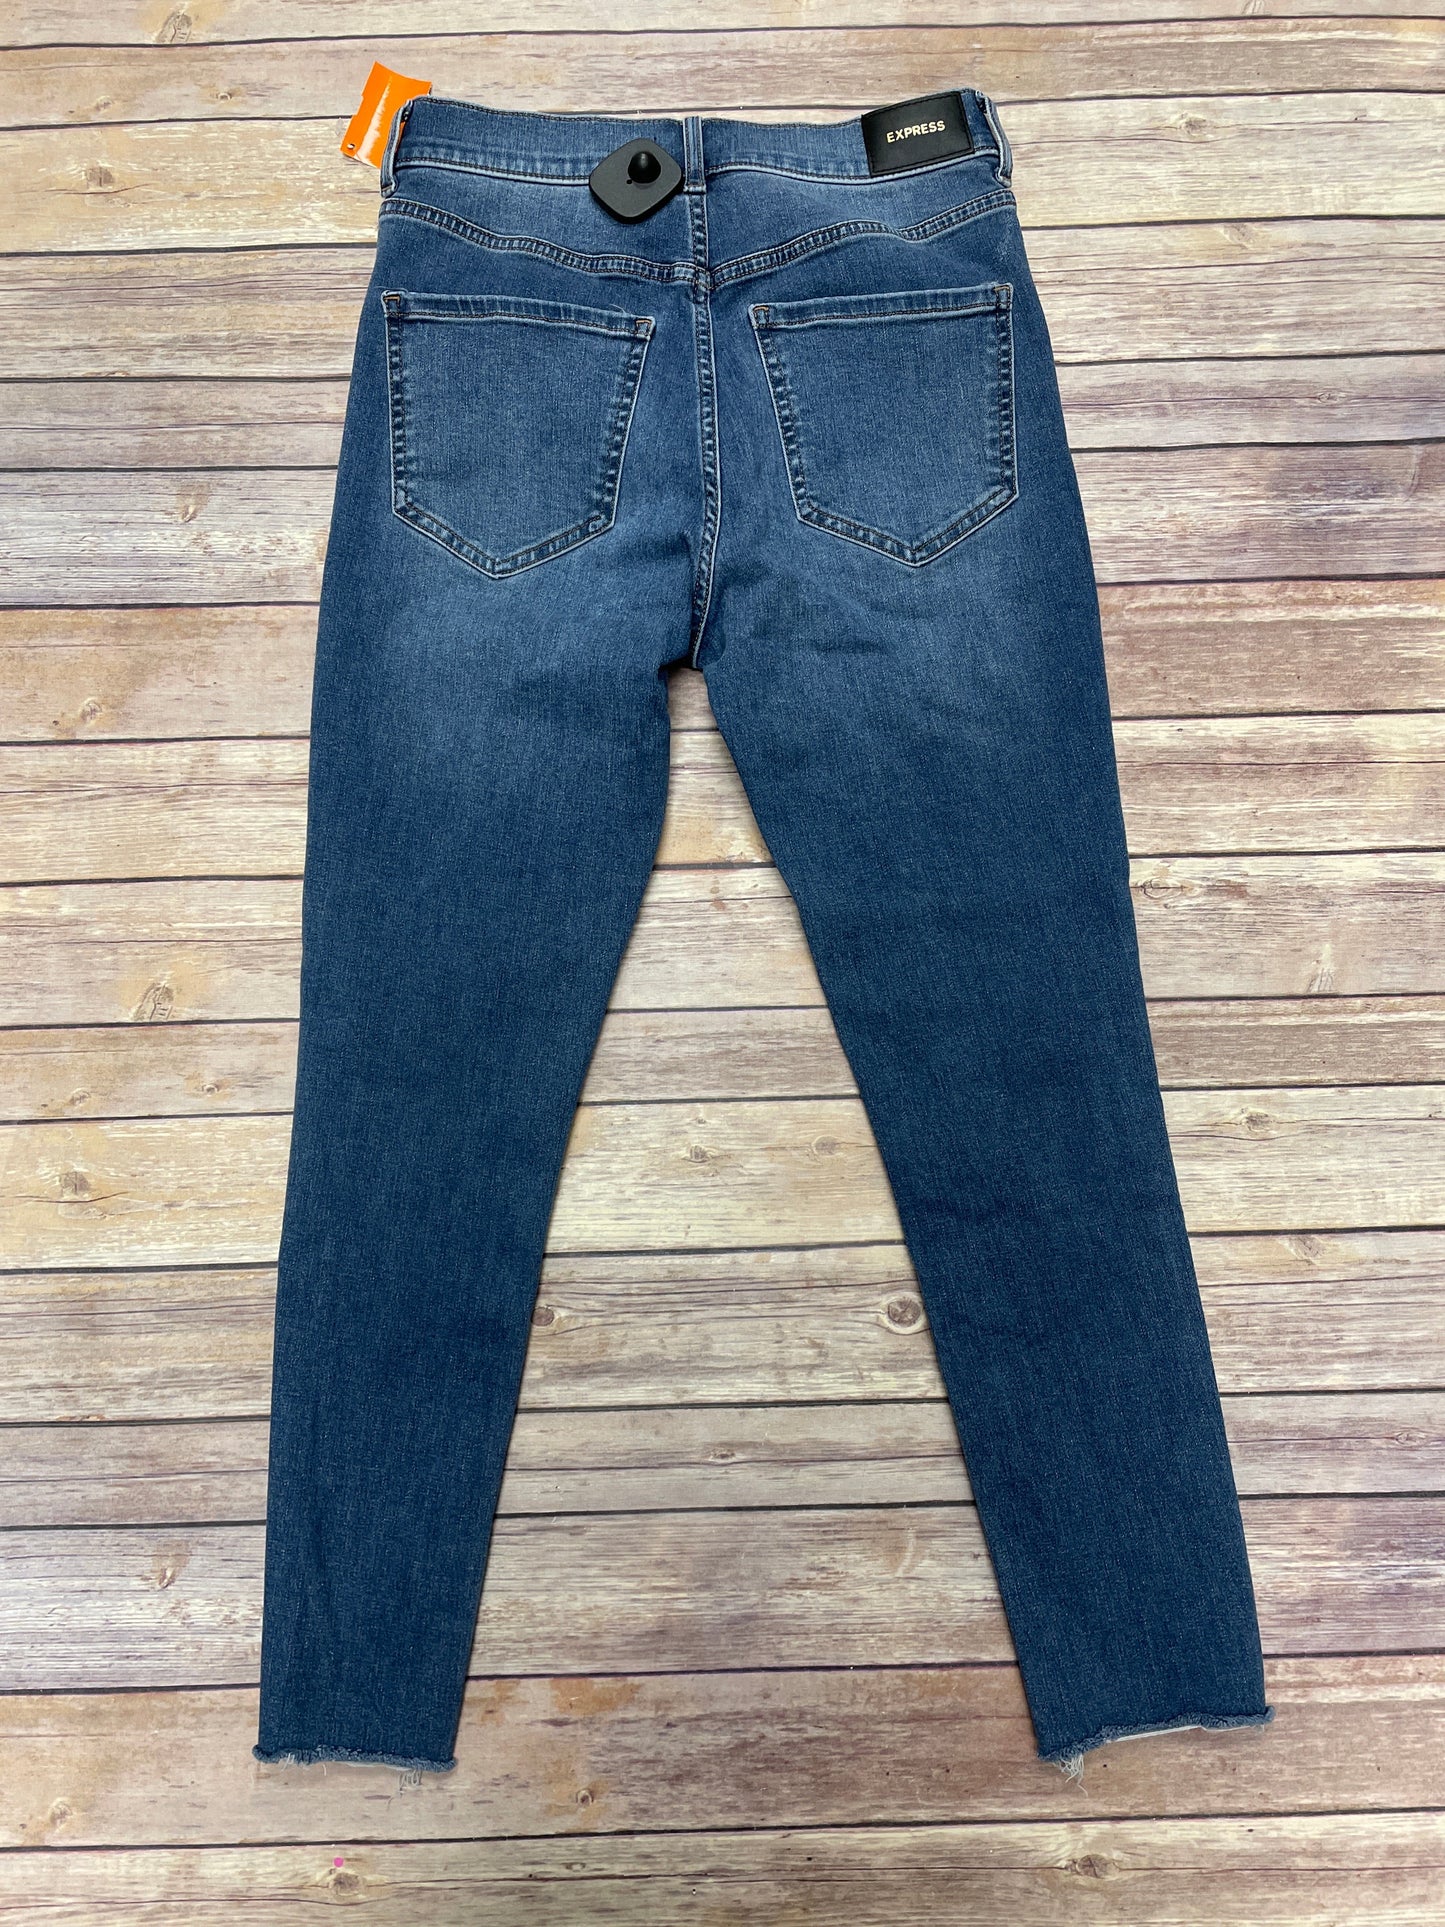 Jeans Skinny By Express  Size: 2